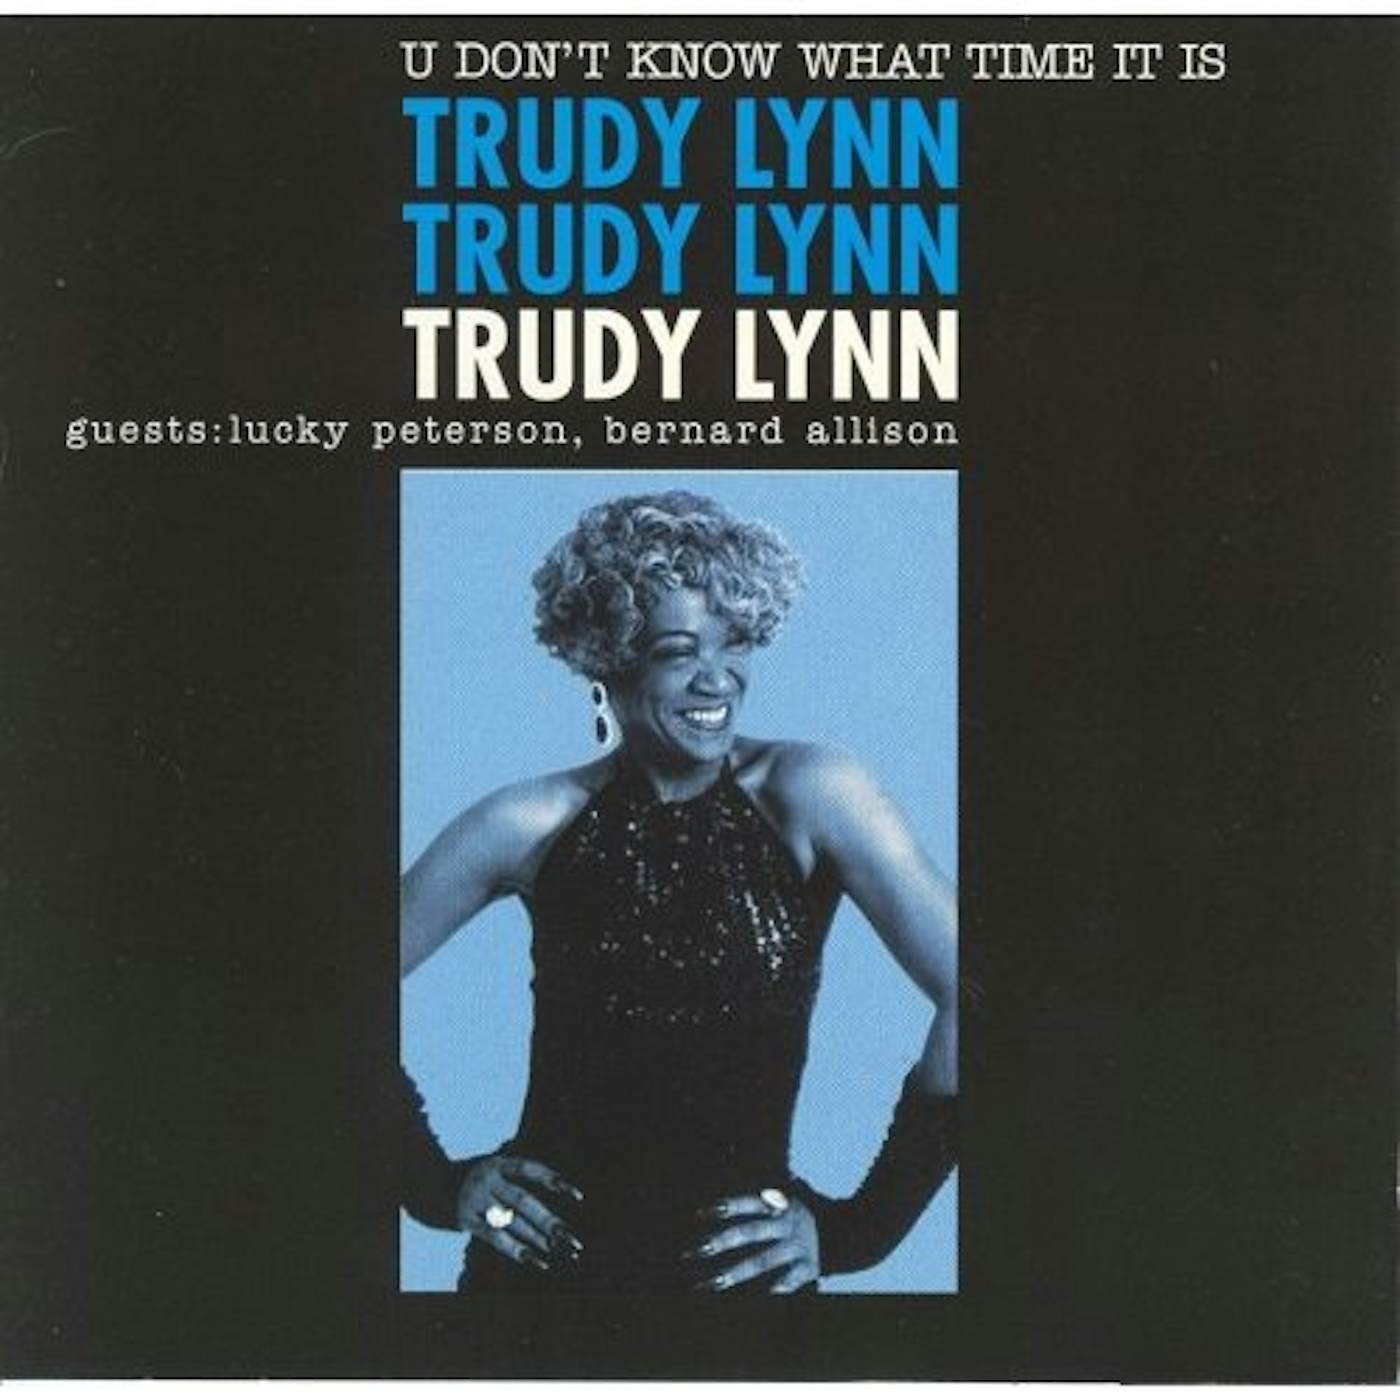 Trudy Lynn U DON'T KNOW WHAT TIME IT IS CD